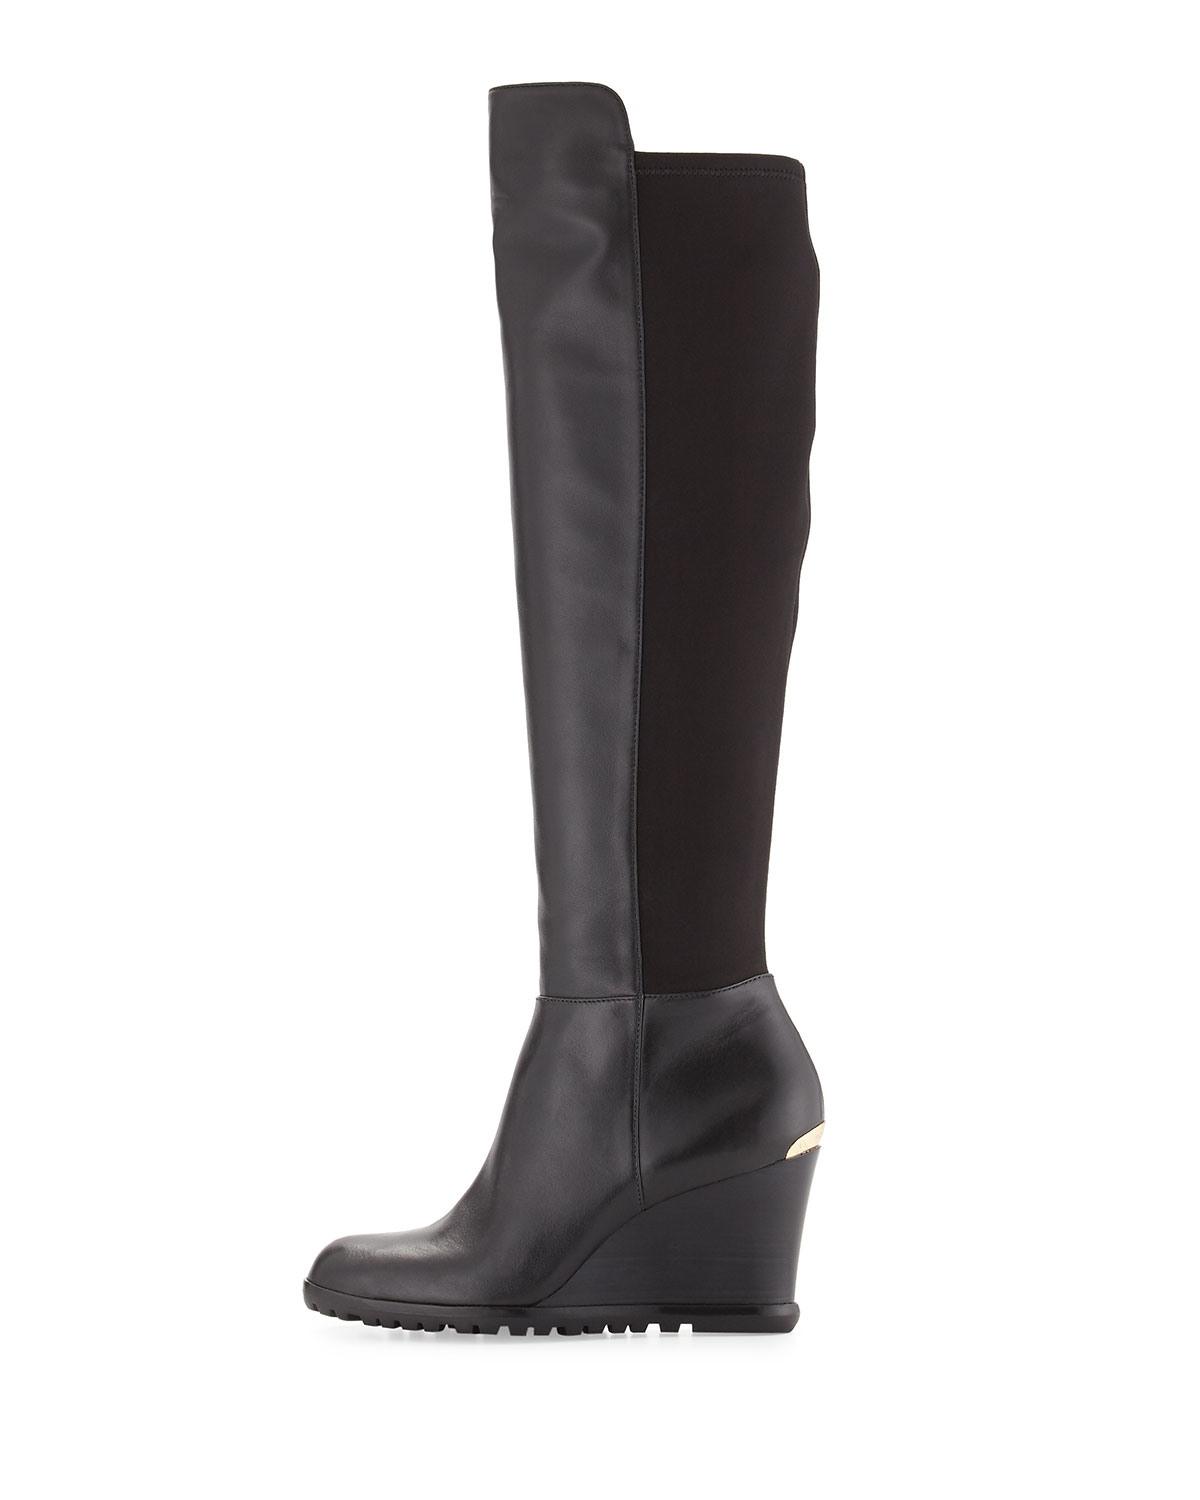 tall wedge boots black